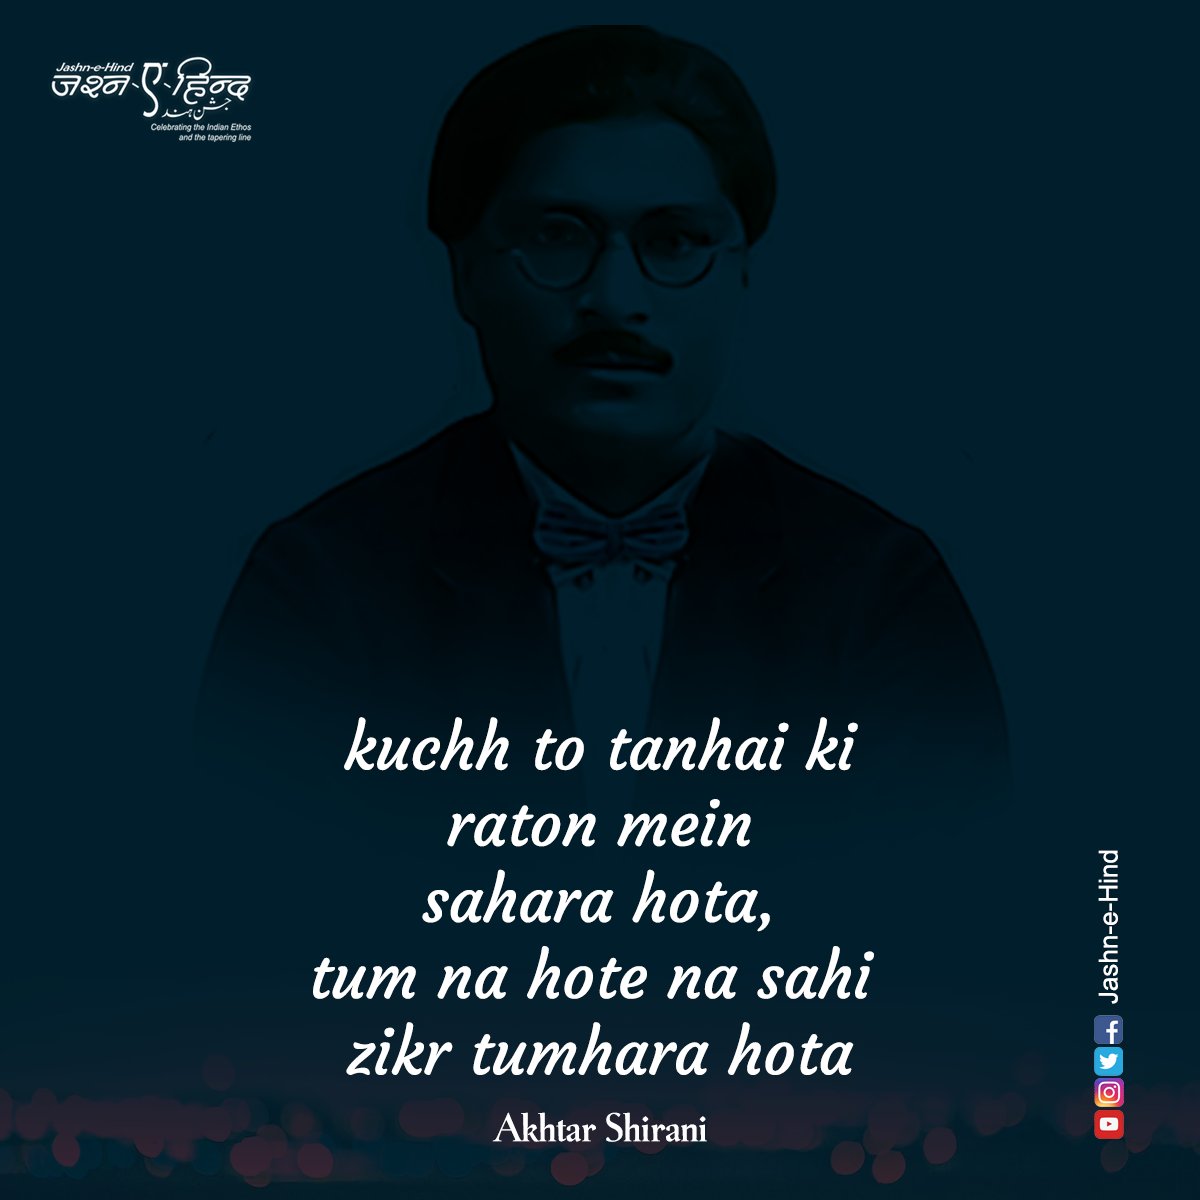 Remembering the legendary Akhtar Shirani (4 May 1905 - 9 September 1948) on his birth anniversary, a poet who immortalized the Urdu language with his eloquent verses.
#AkhtarShirani  #Urdu #Shayar #jashnehind #festival #birthday